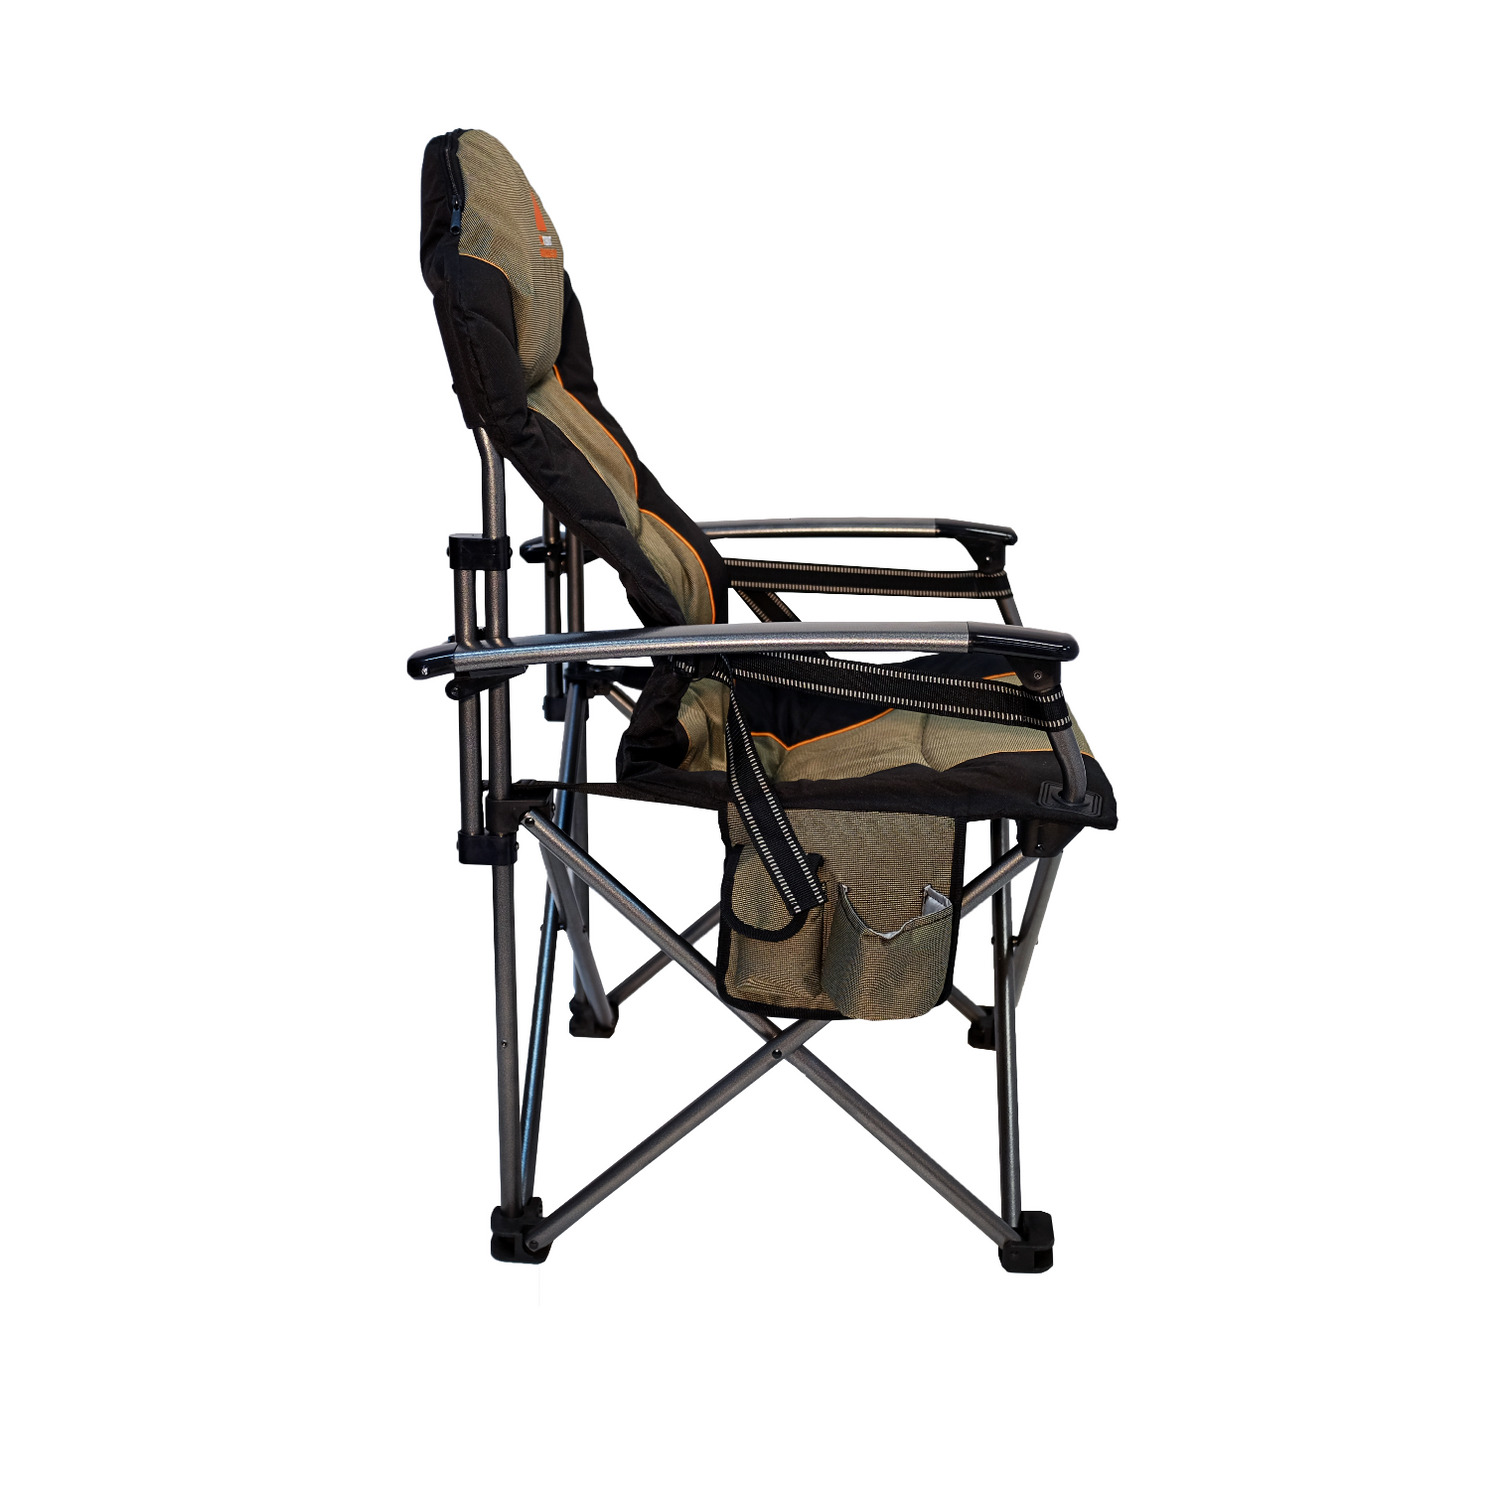 Oztent King Kokoda Chair; side view with can holders and pocket